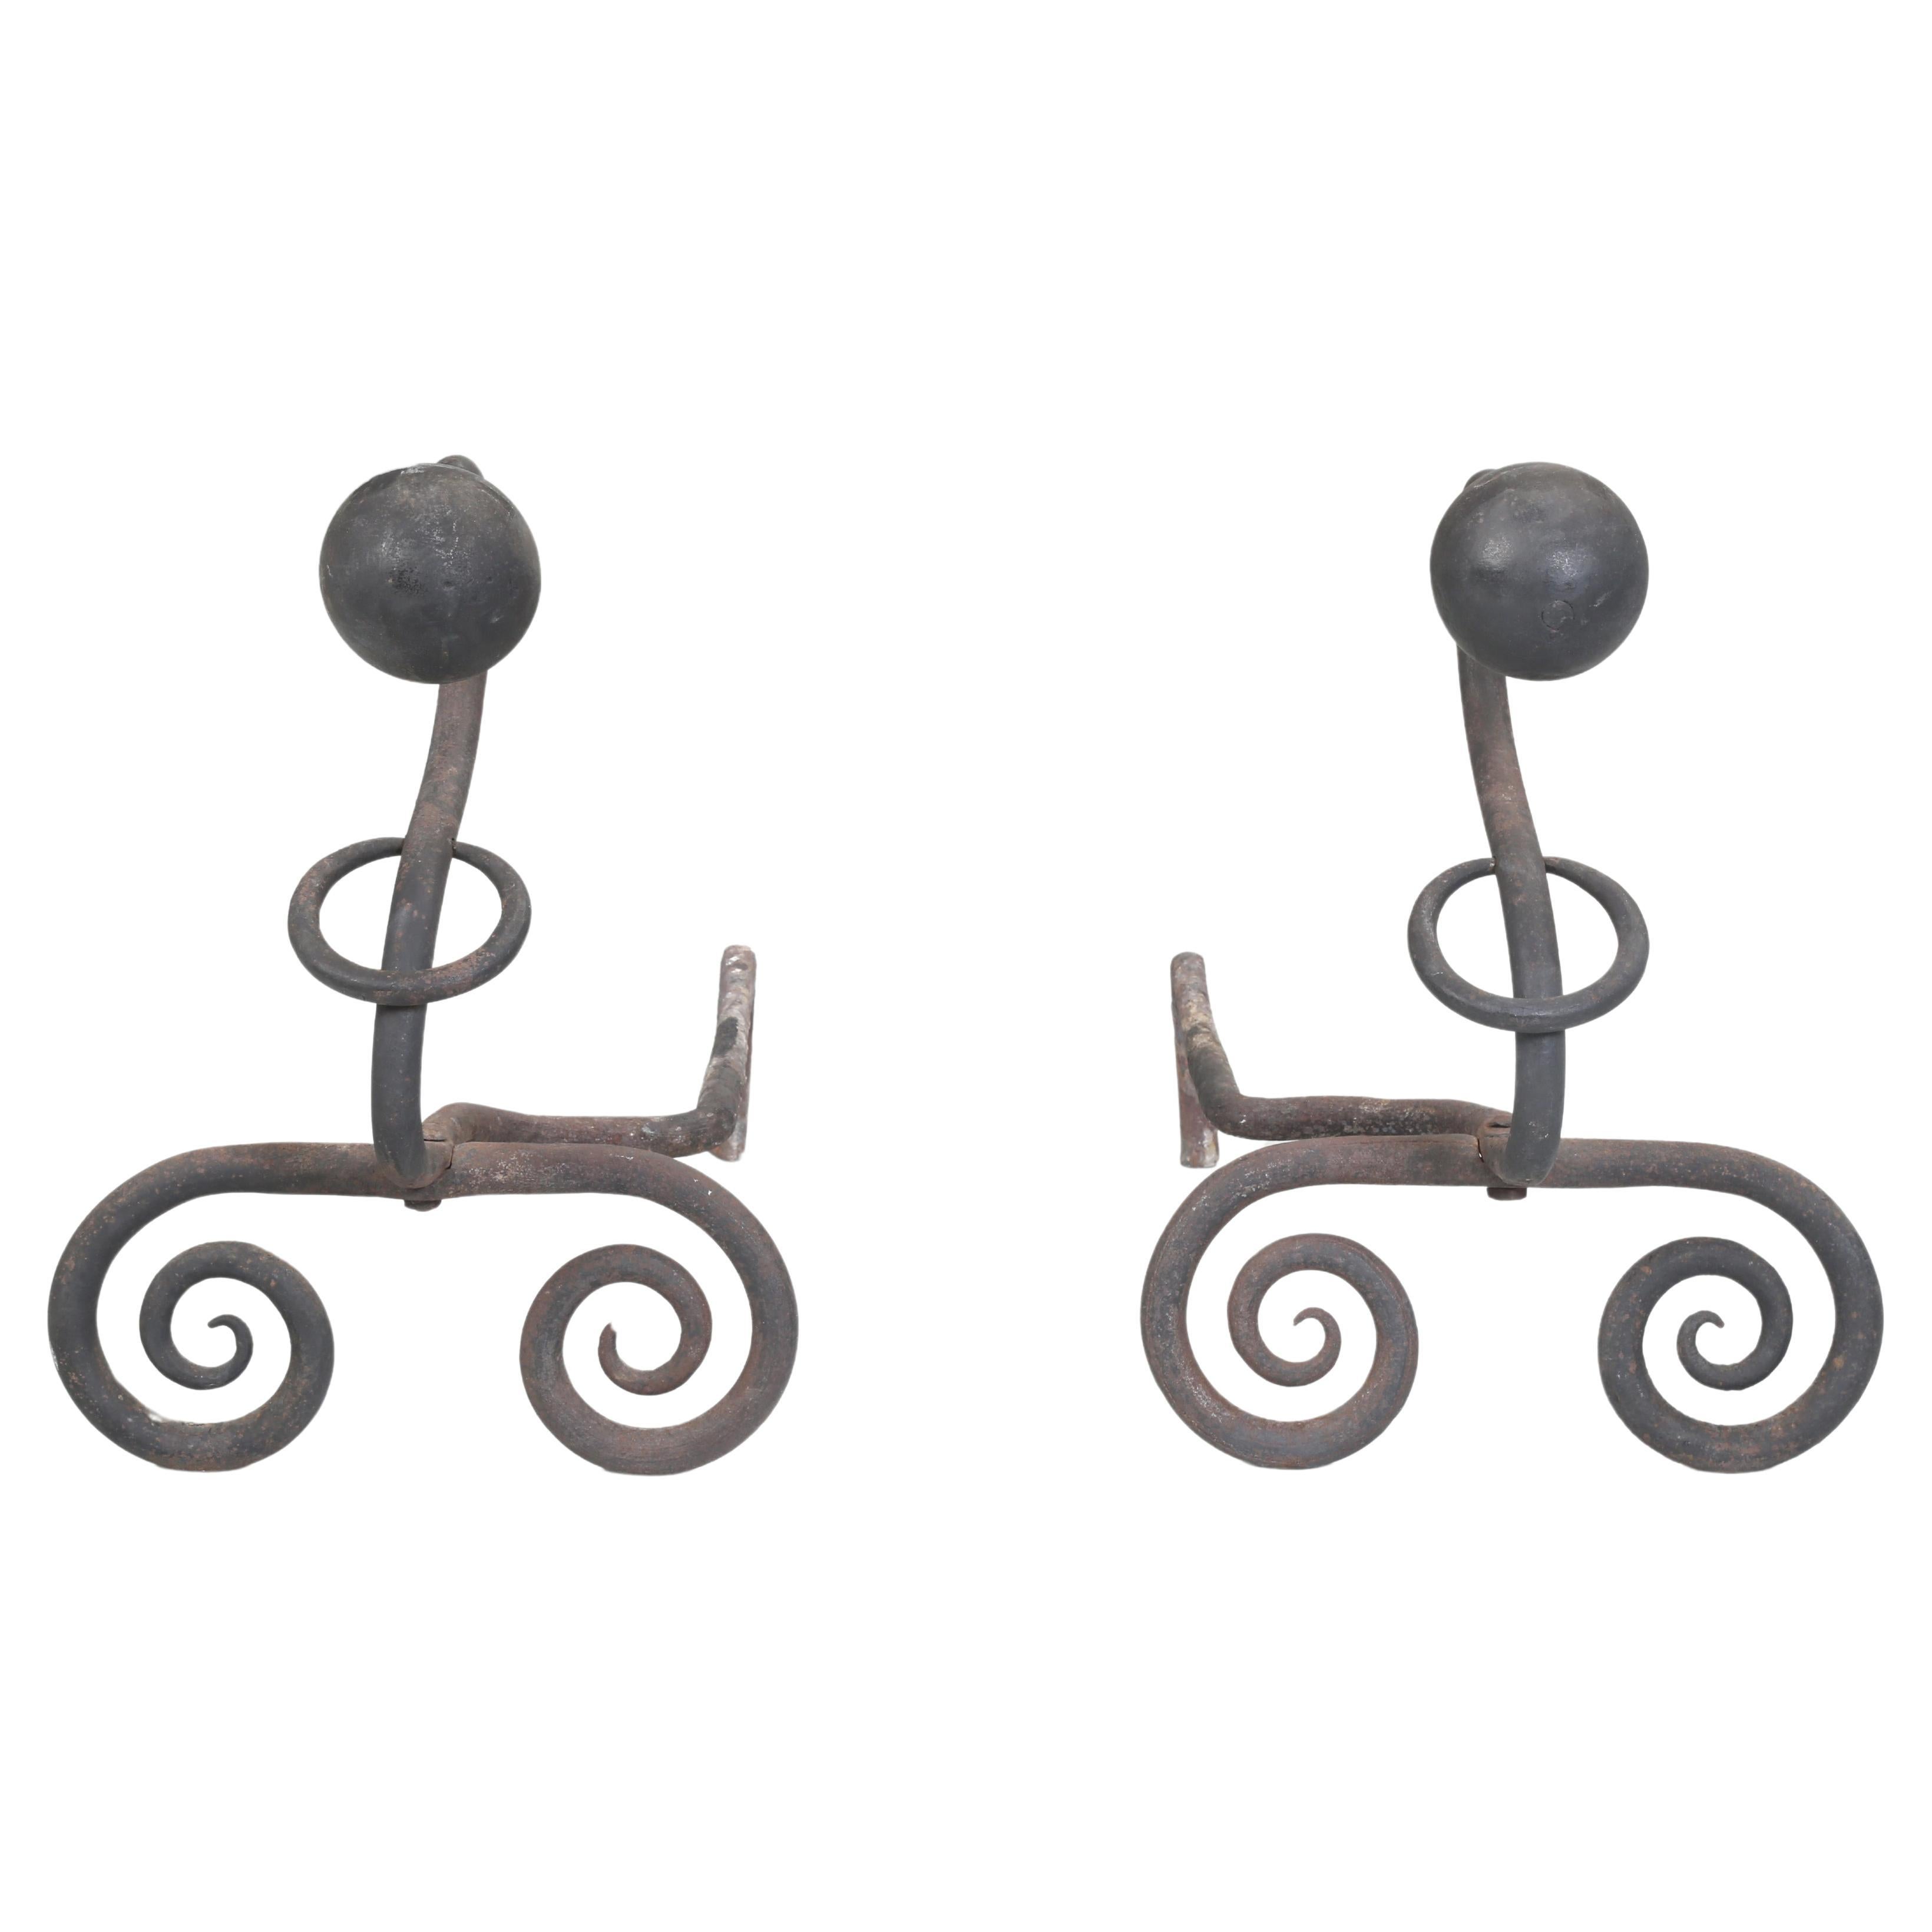 Wrought Iron Fireplace Andirons. Modernist Curled Form with Sphere Top c1940's